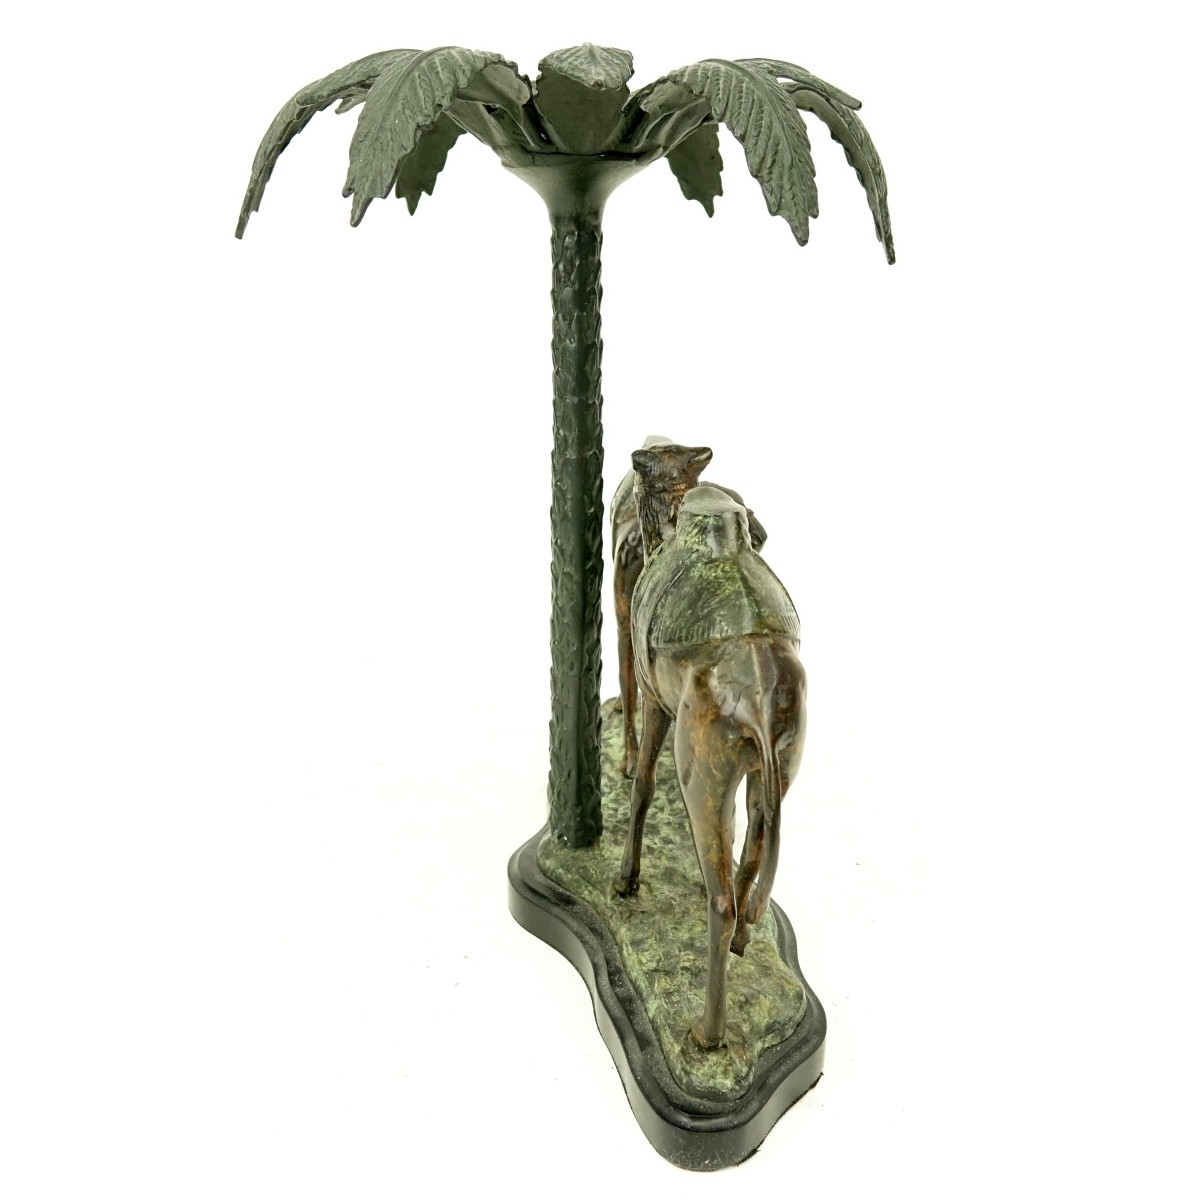 Polychrome Metal Palm Tree and Camel Sculpture